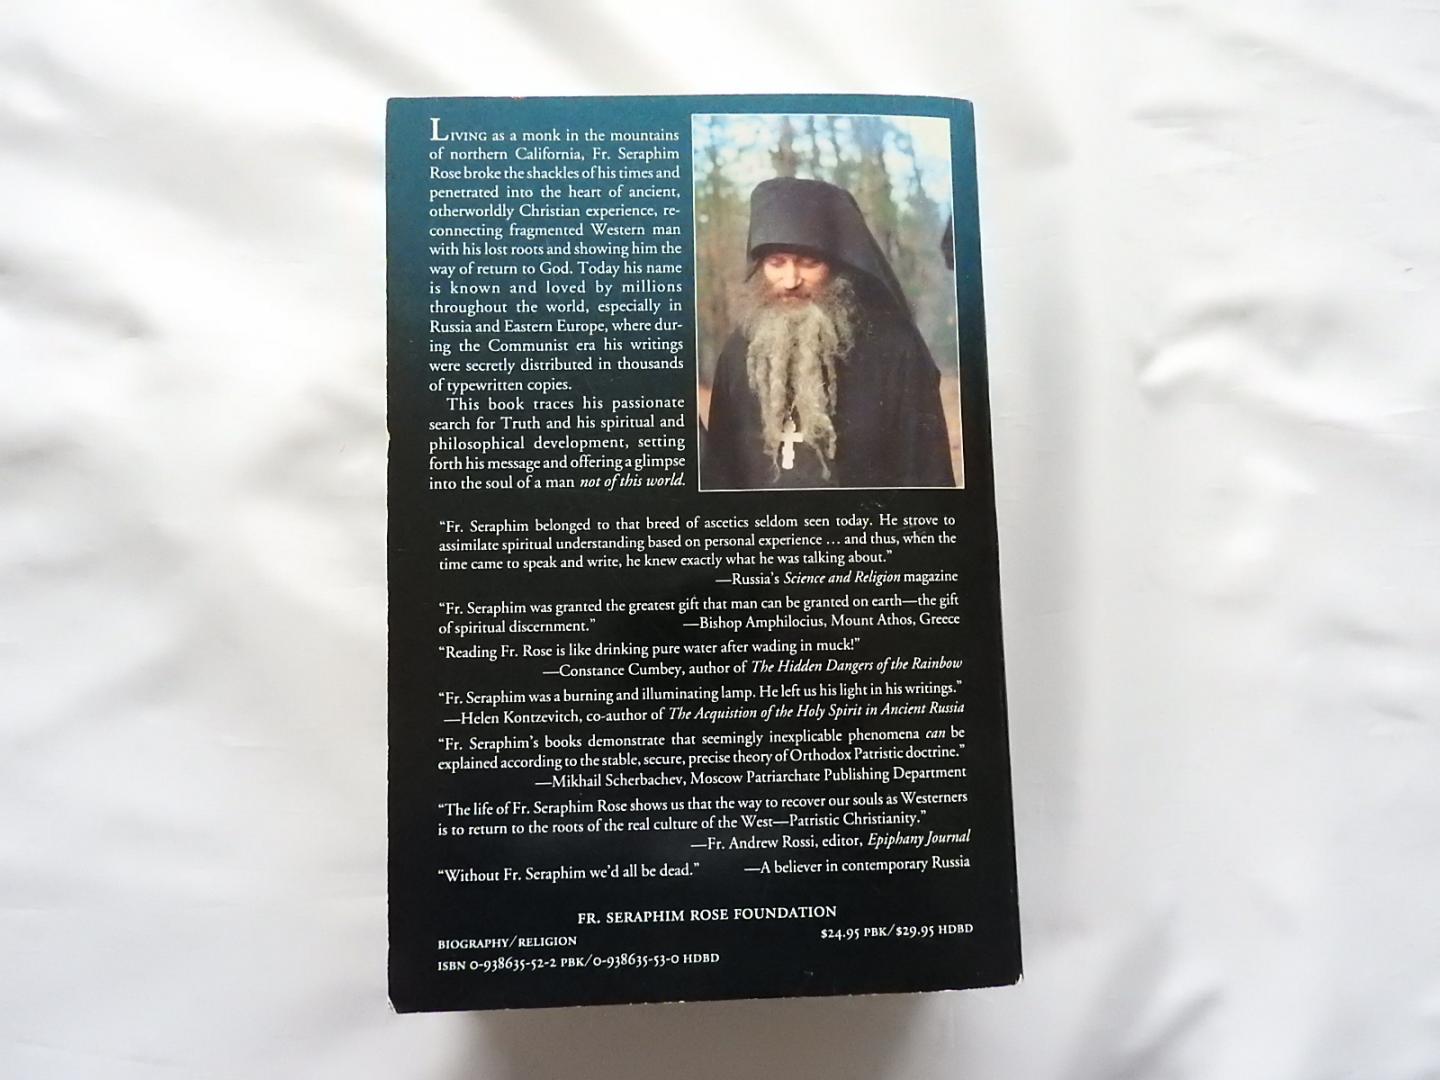 Monk Damascene Christensen - Not of this world : the life and teaching of Fr. Seraphim Rose, pathfinder to the heart of ancient christianity